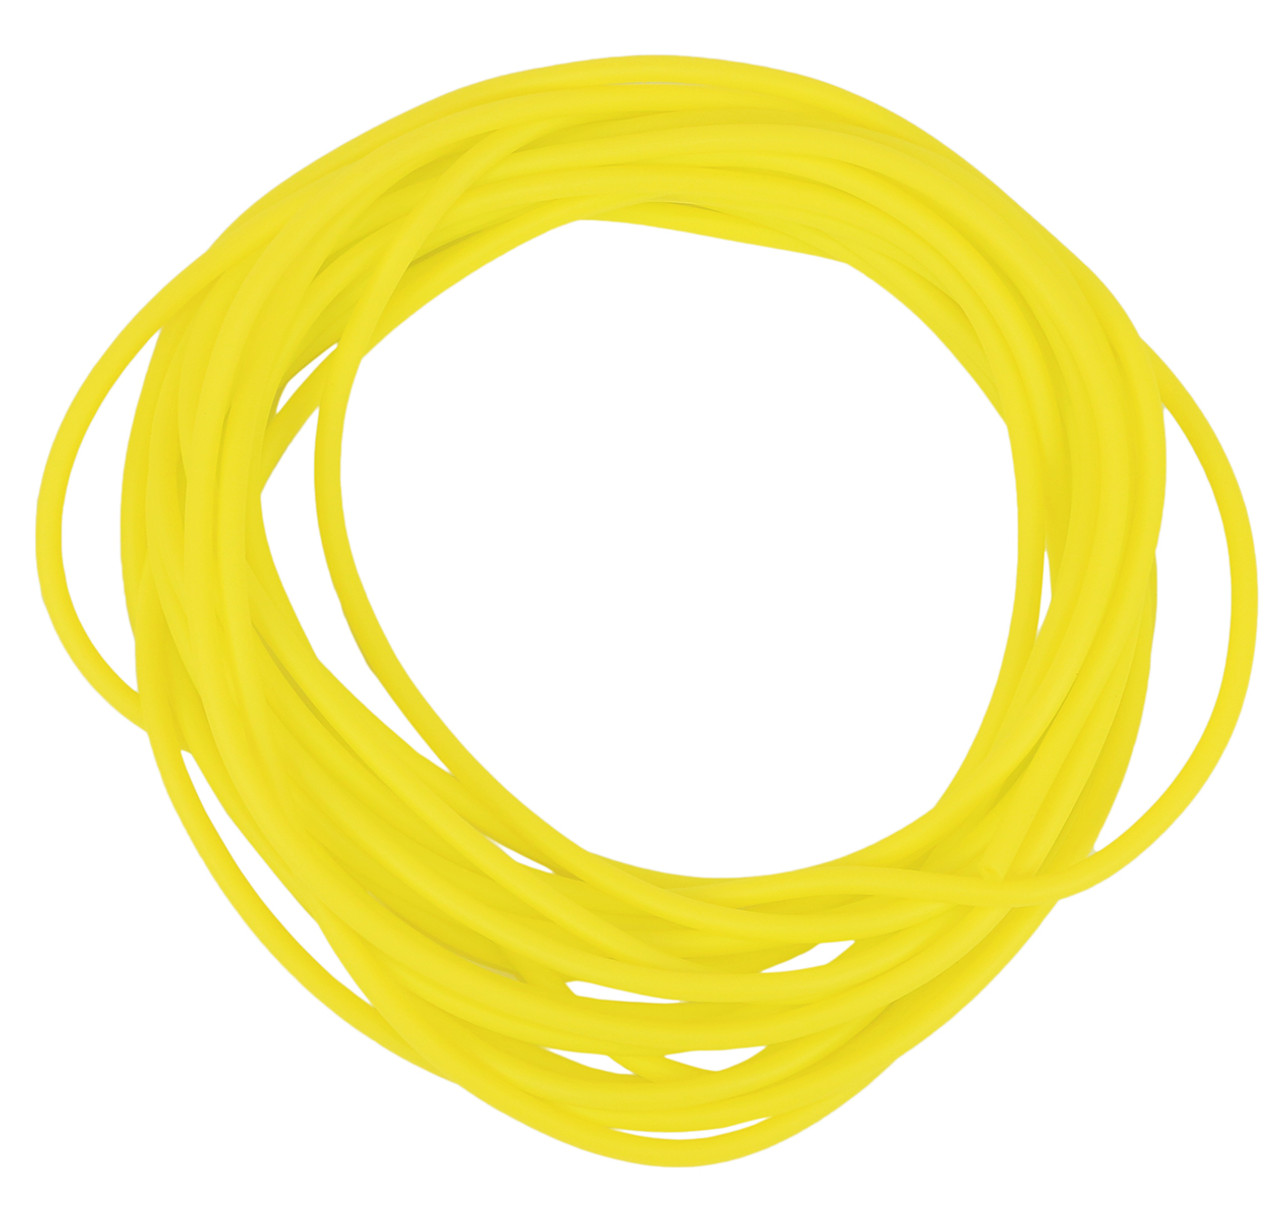 CanDo¨ Latex Free Exercise Tubing - 25' roll - Yellow - x-light